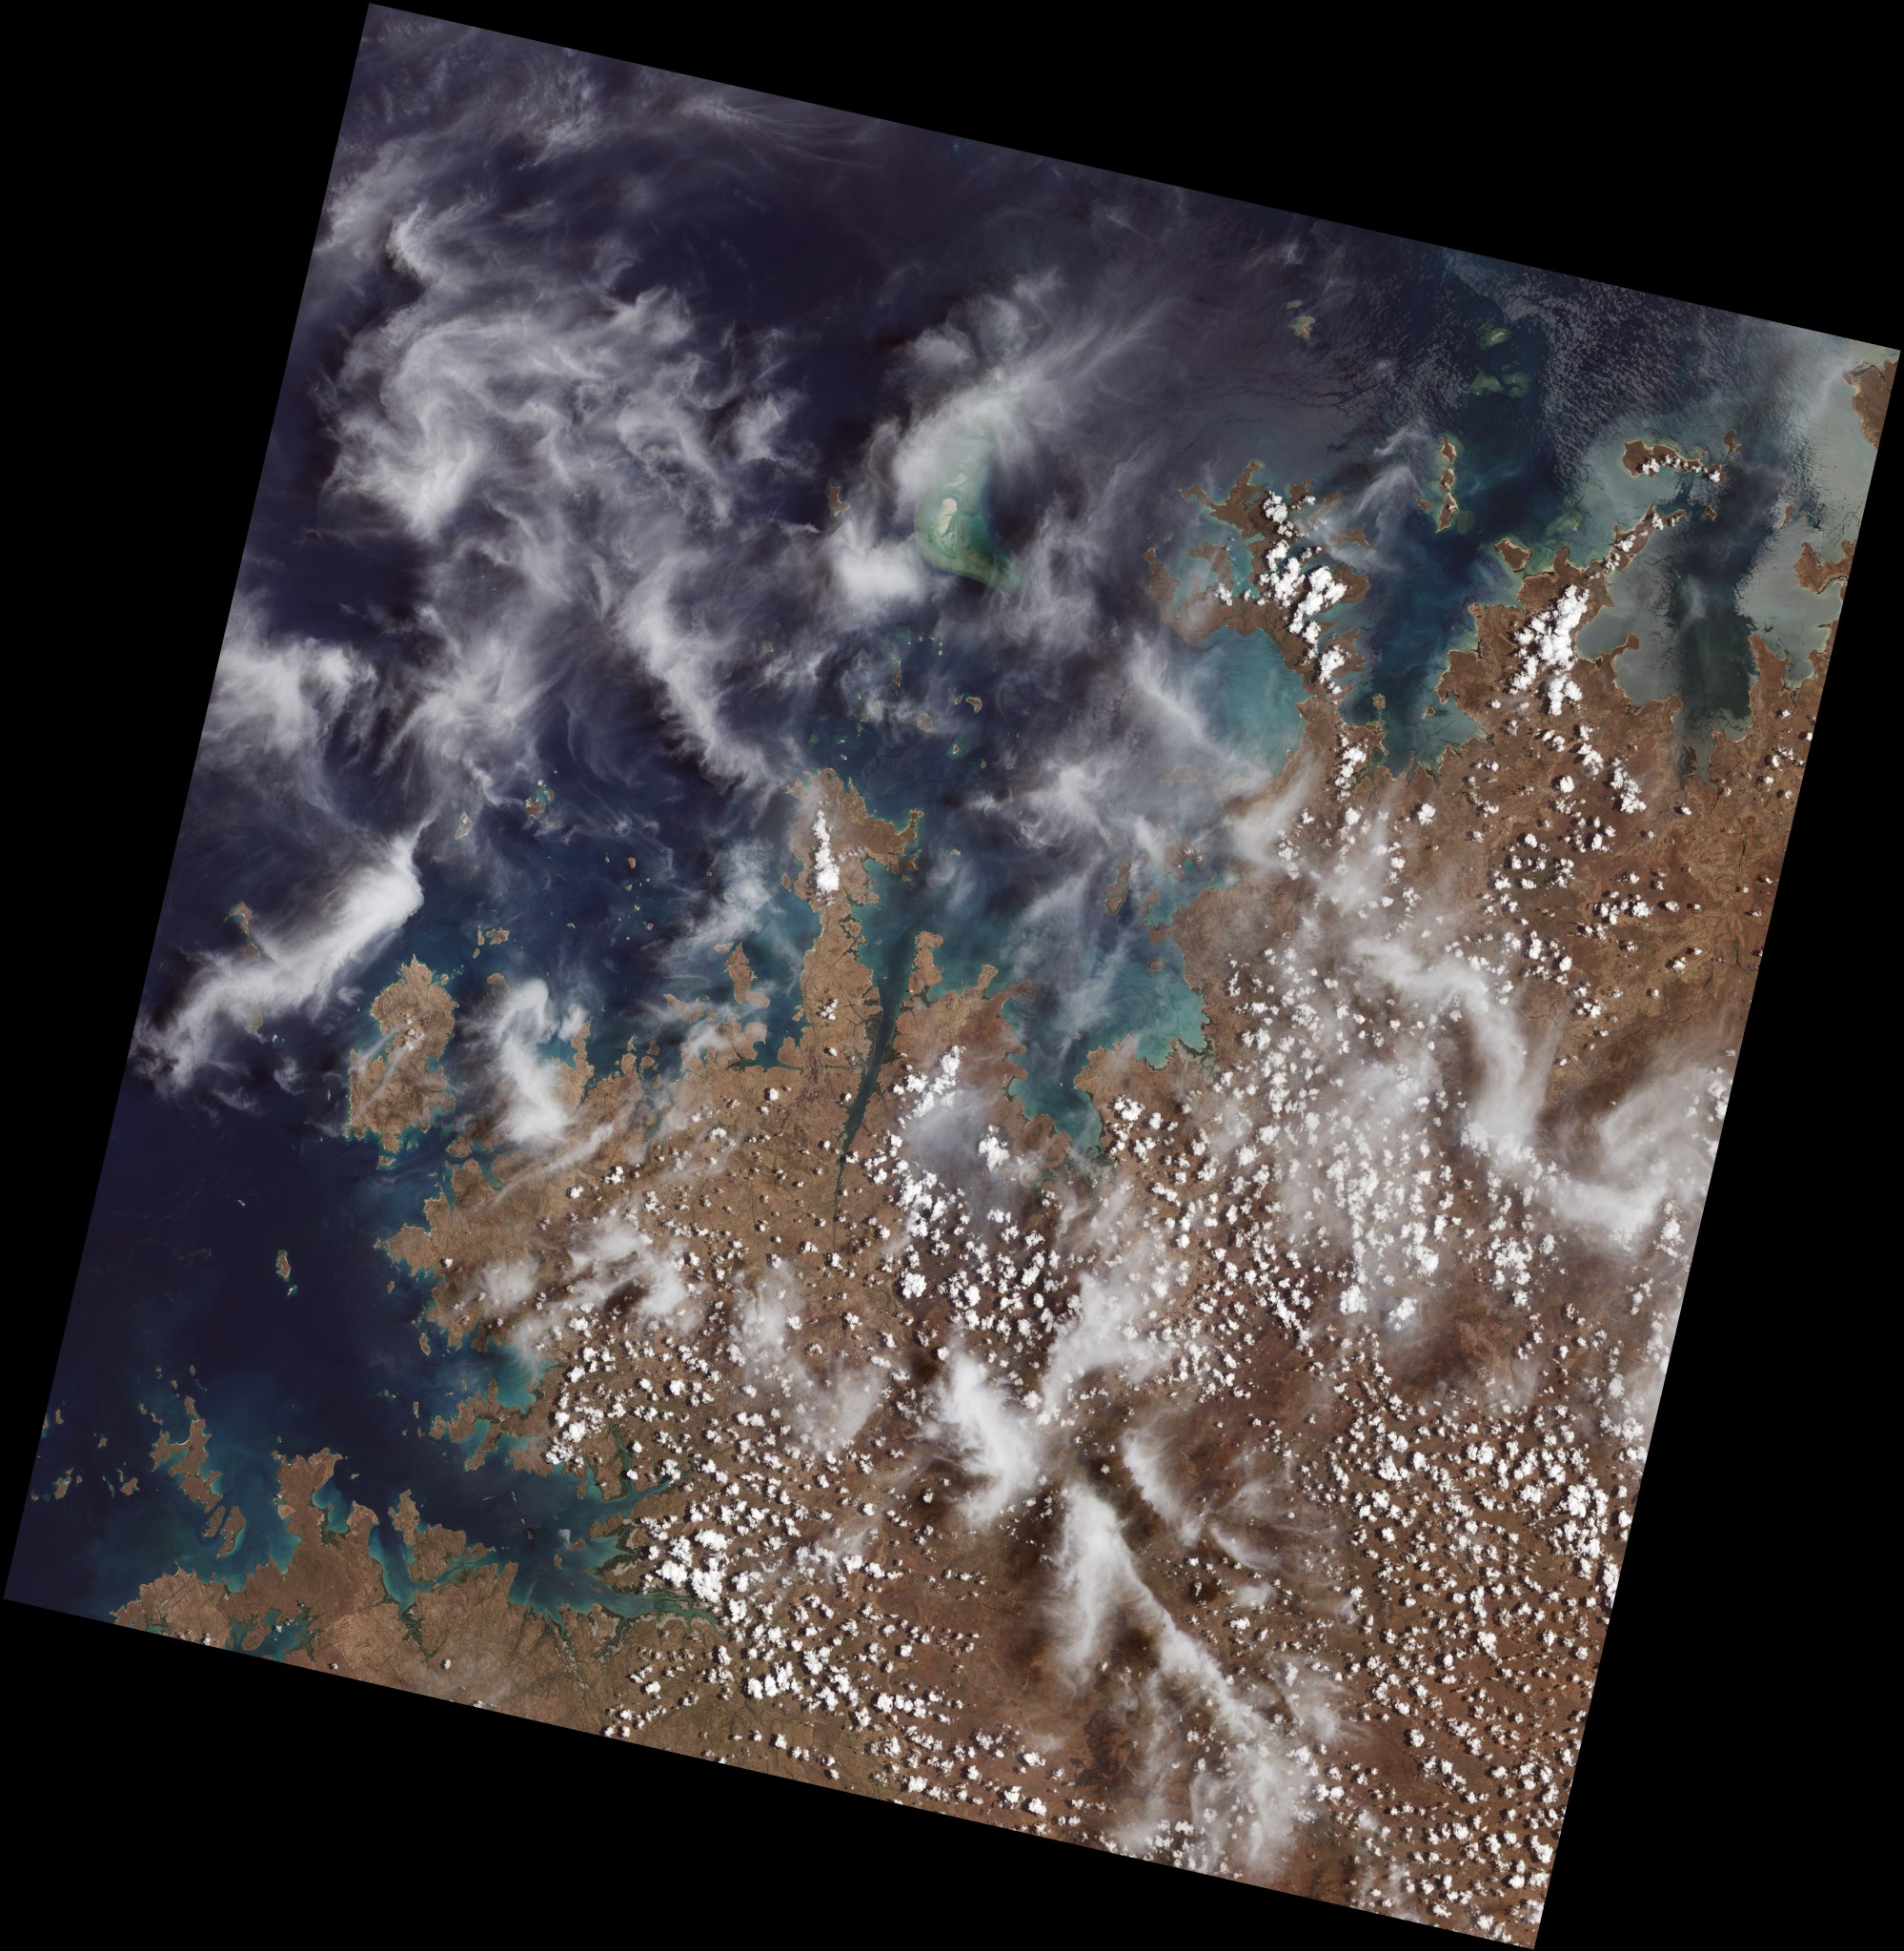 The first image collected by Landsat 9, on Oct. 31, 2021, shows mangroves along the northwest coast of Australia clustered in protected inlets and bays on the edge of the Indian Ocean. Fluffy cumulus clouds and high-altitude cirrus clouds hover nearby. 